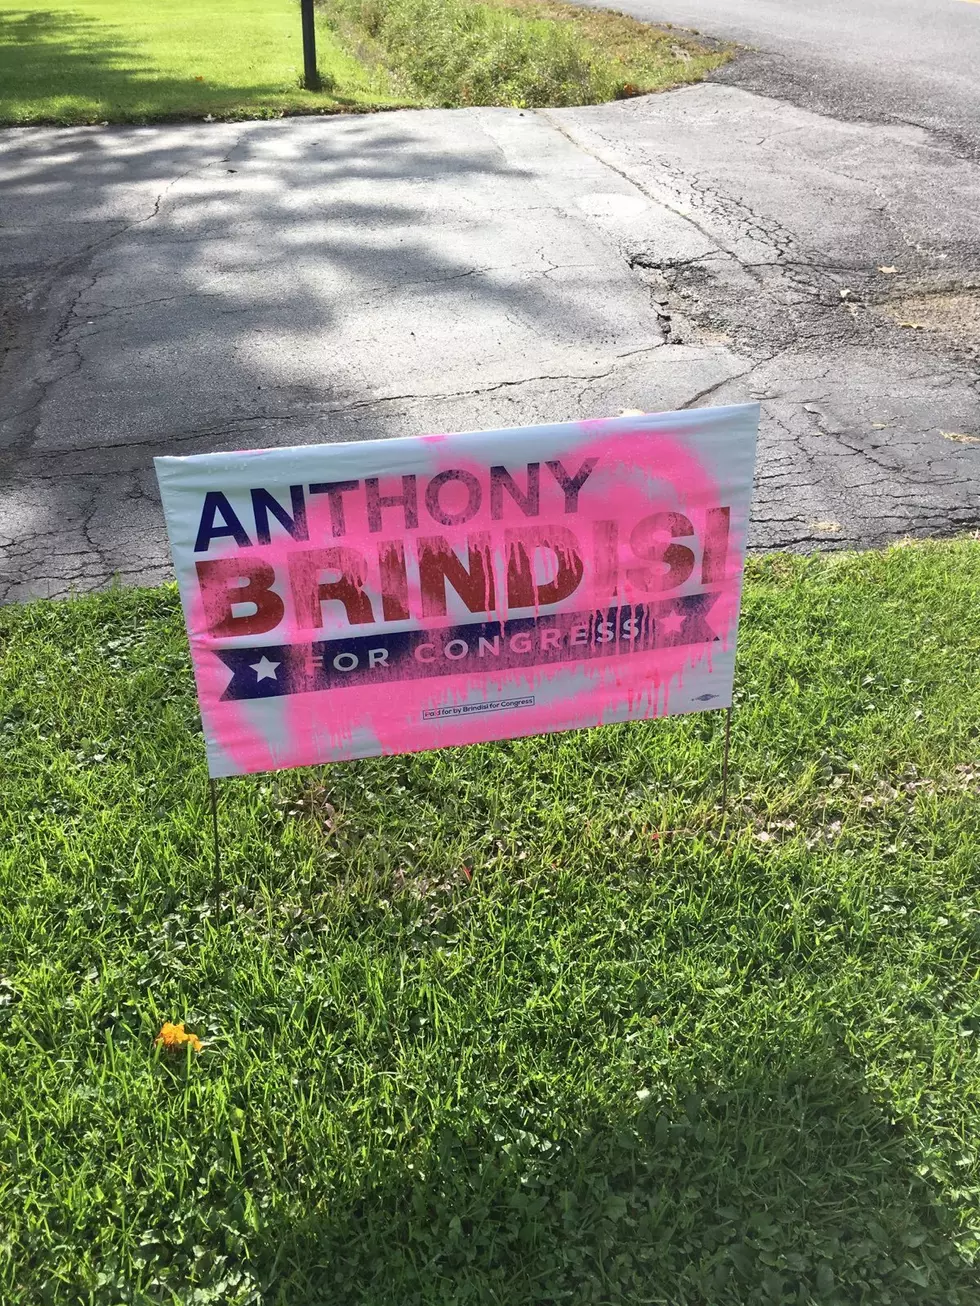 Tenney And Brindisi Spar Over Vandalized Campaign Signs